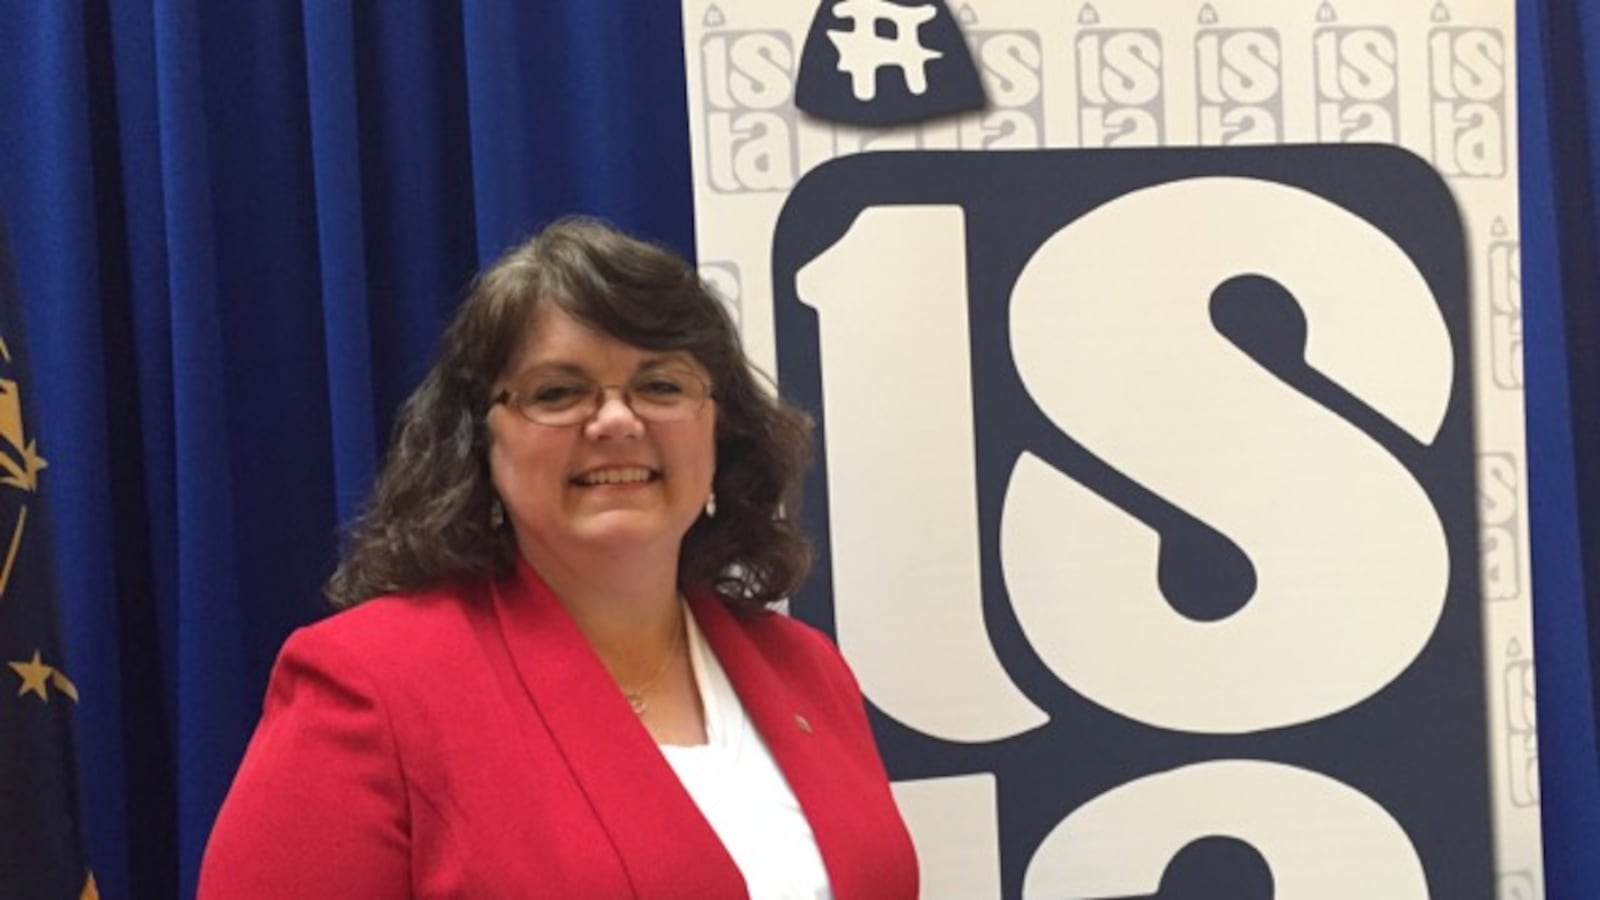 Teresa Meredith is the president of the Indiana State Teachers Association